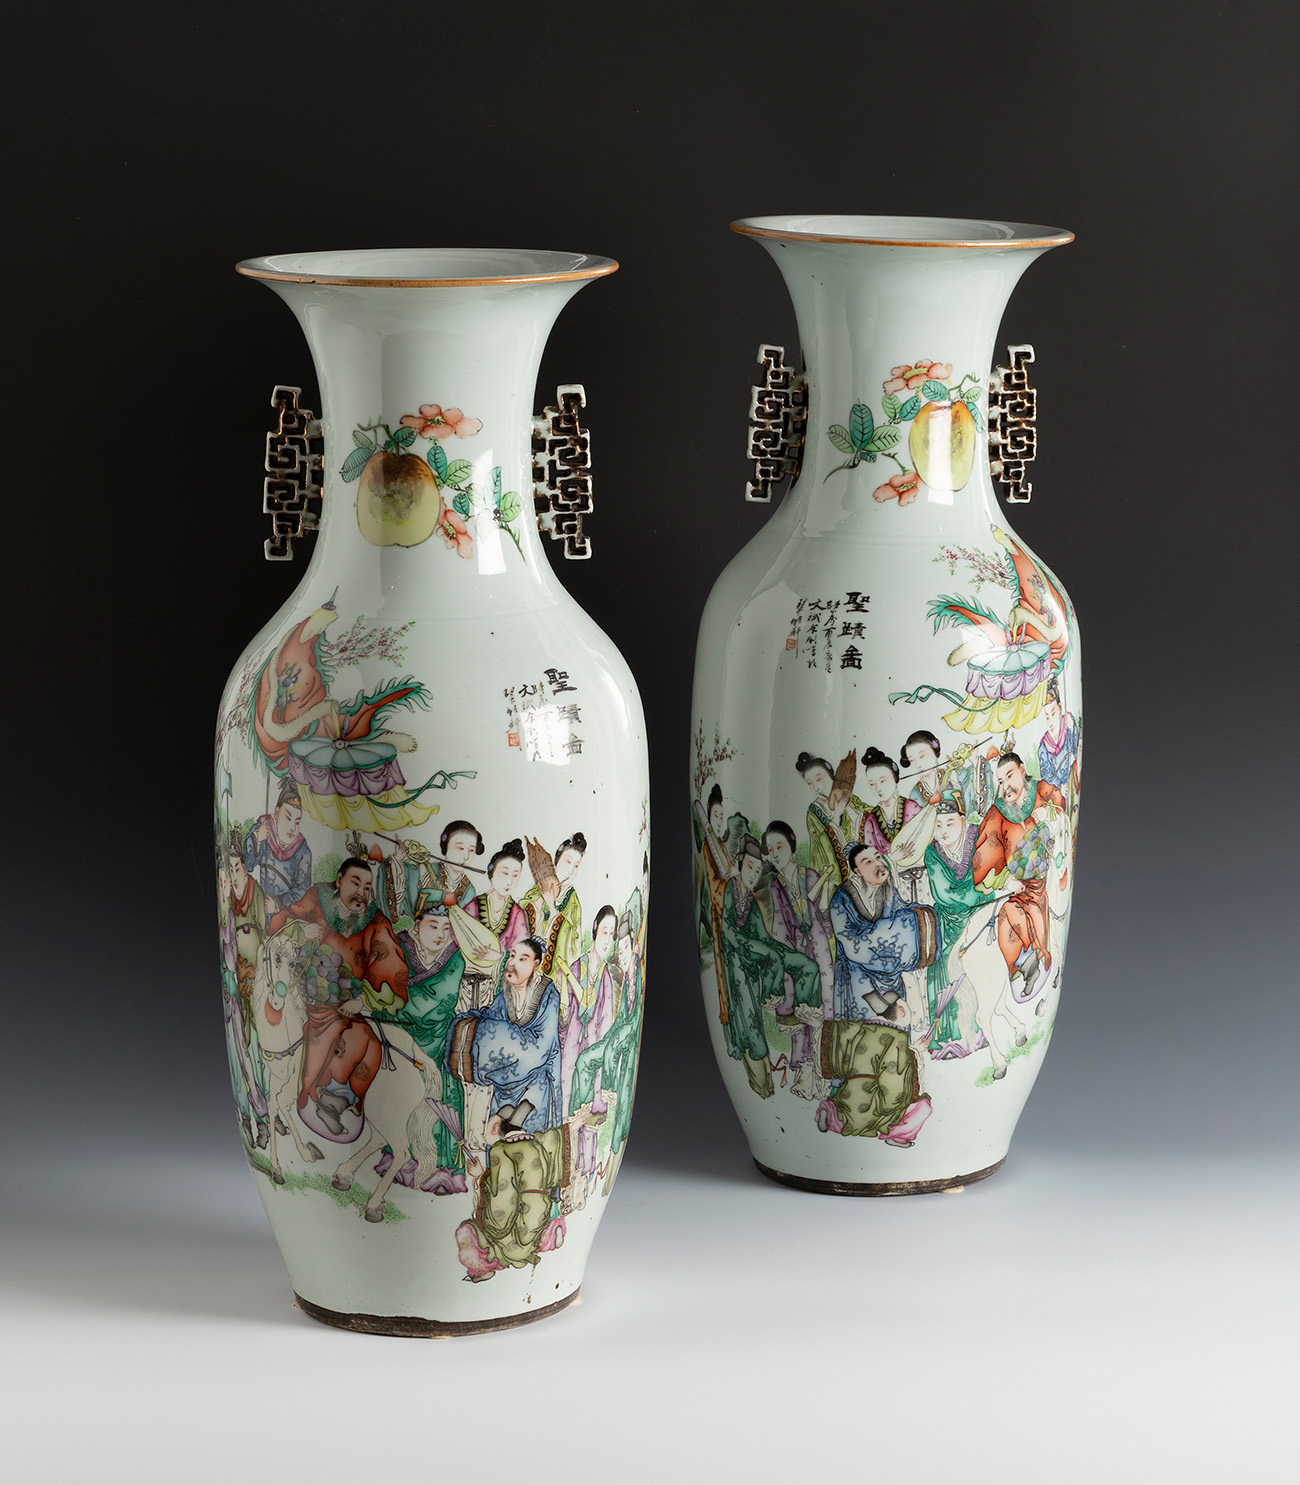 Pair of Qing dynasty vases, Green Family. China, 19th century.Hand-painted porcelain.With